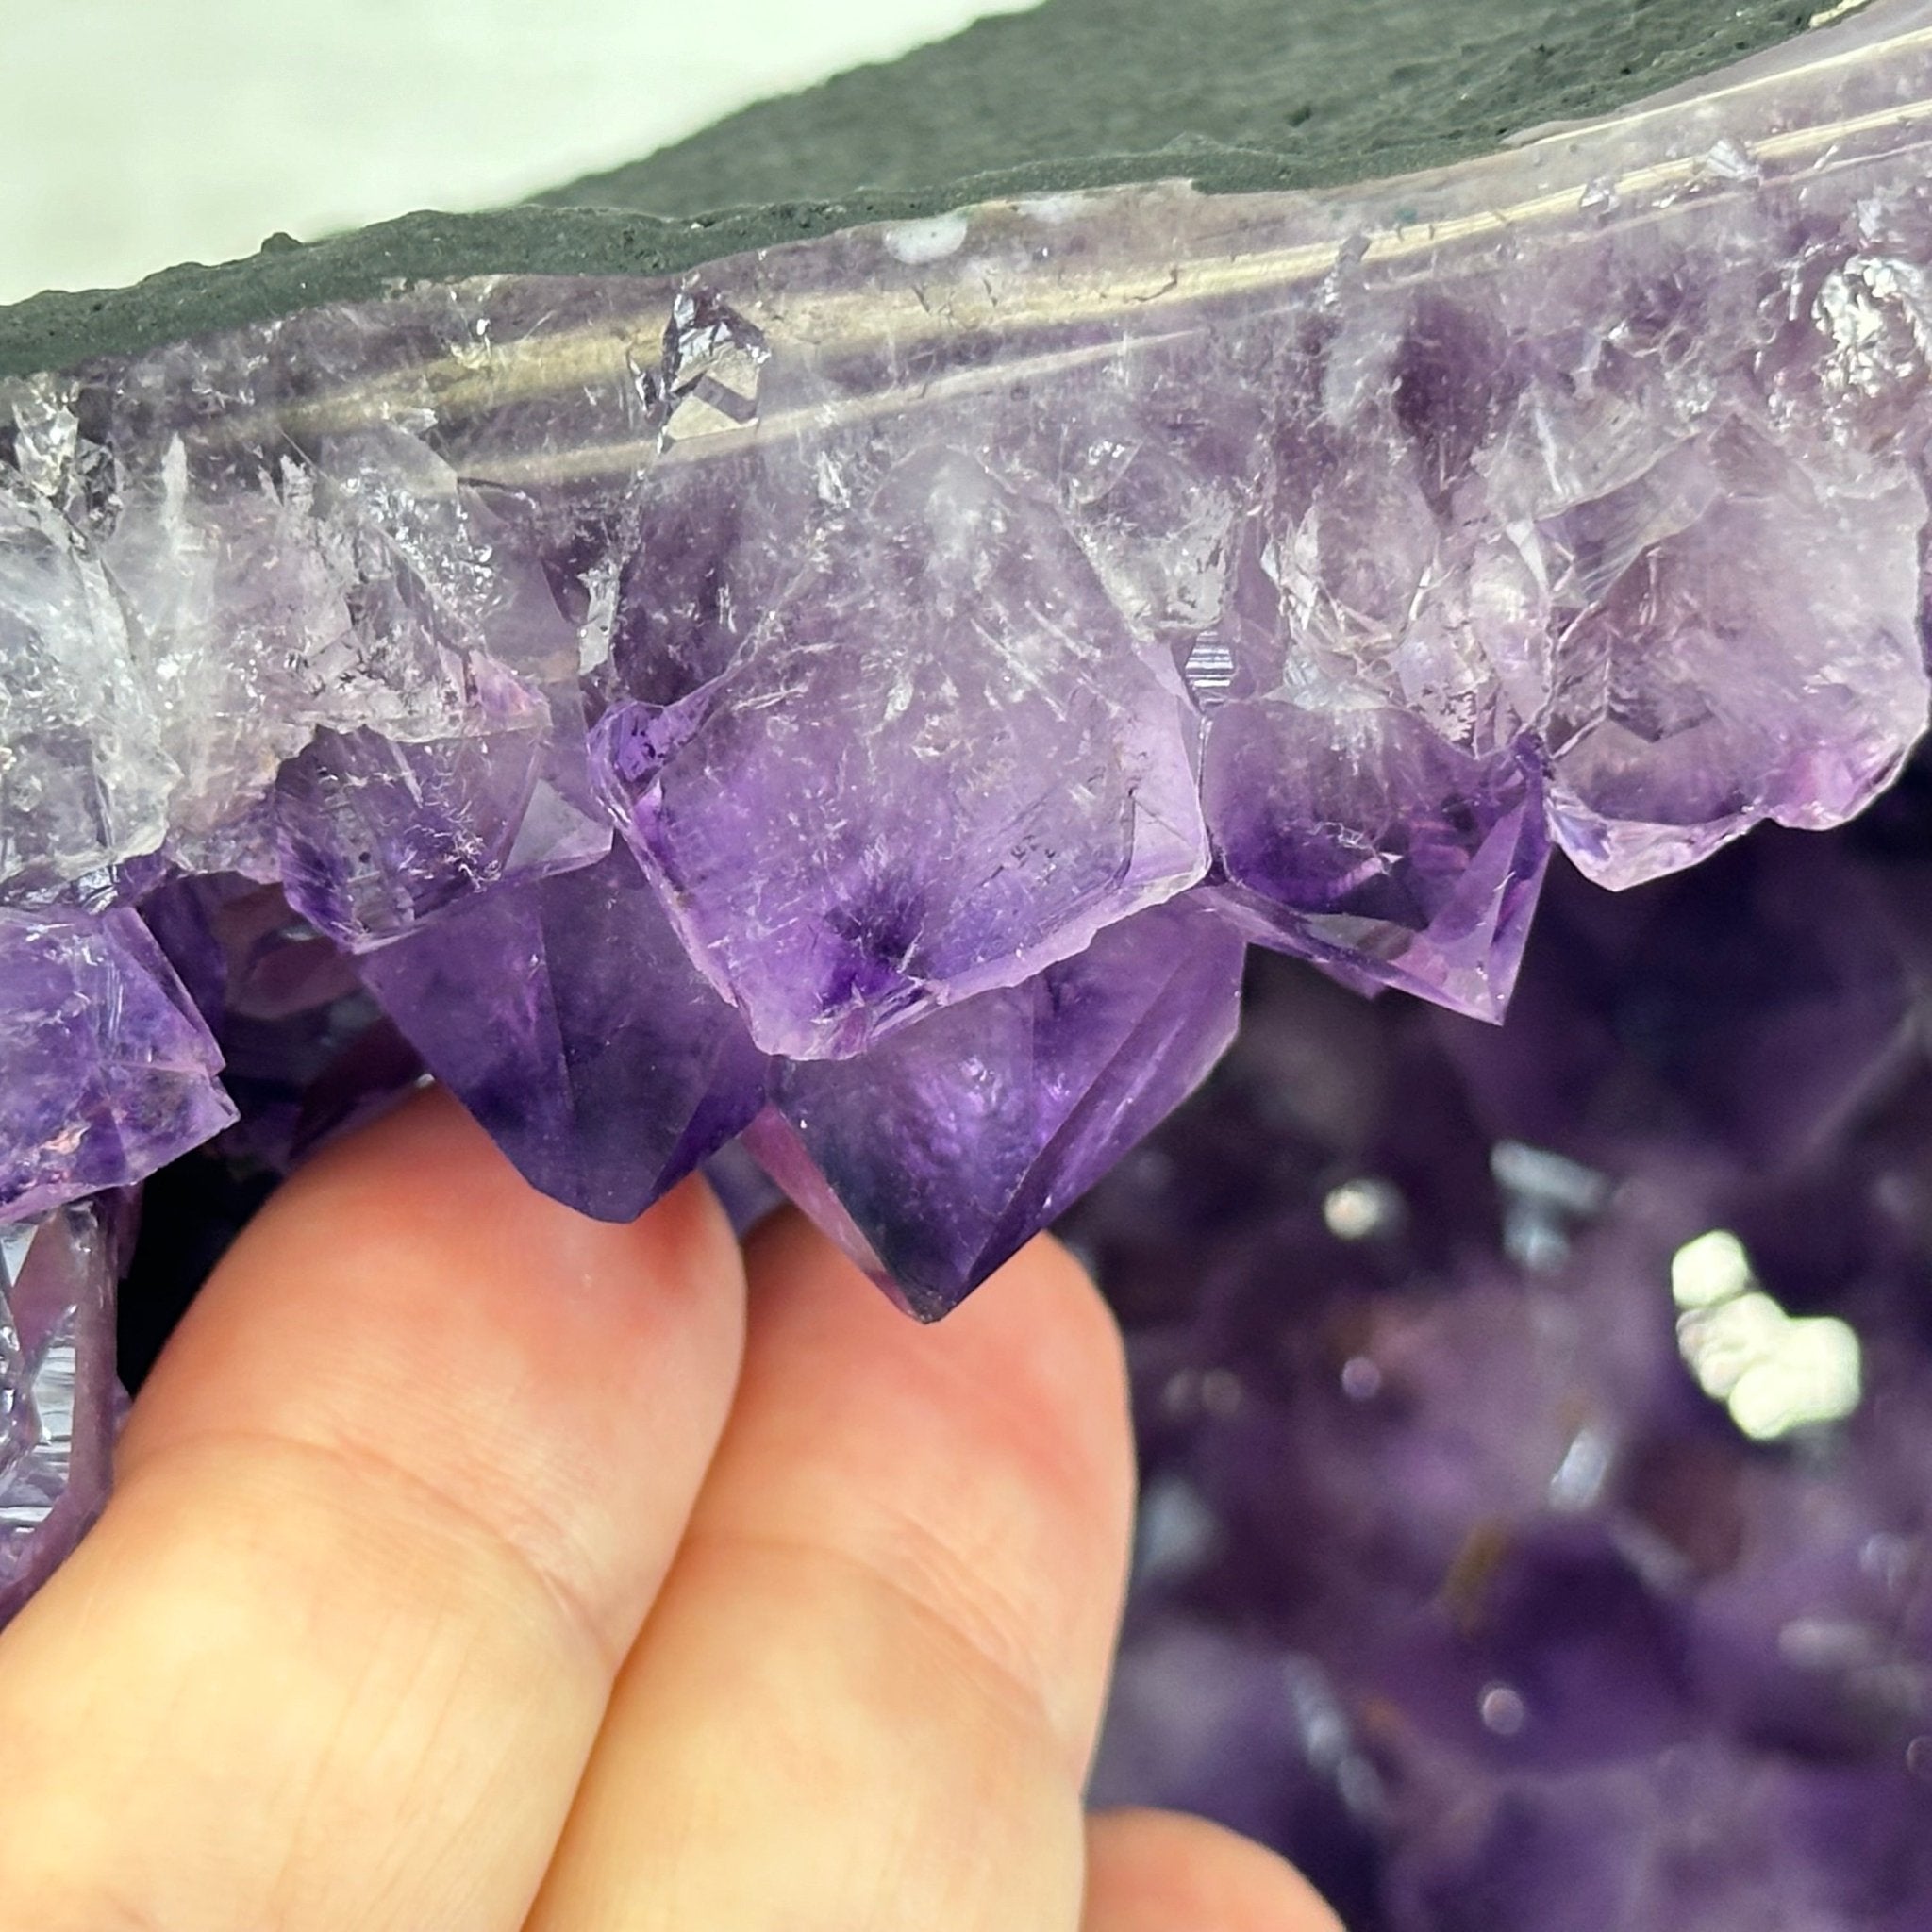 Quality Brazilian Amethyst Cathedral, 16.8 lbs & 7" Tall, #5601 - 1371 - Brazil GemsBrazil GemsQuality Brazilian Amethyst Cathedral, 16.8 lbs & 7" Tall, #5601 - 1371Cathedrals5601 - 1371